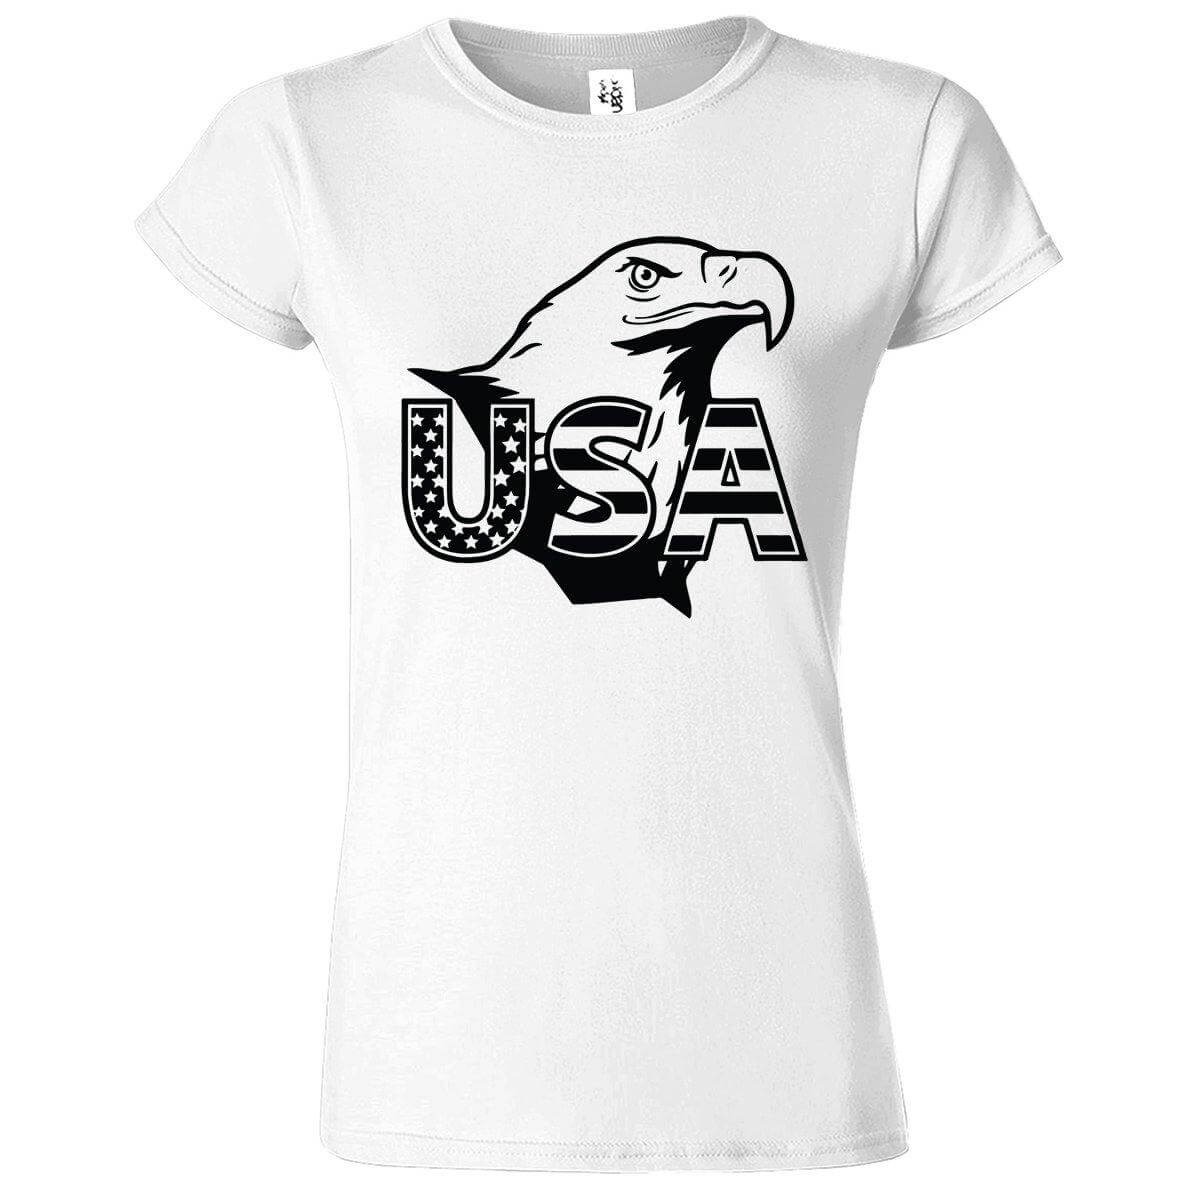 Eagle USA Printed T-Shirt for Women's - ApparelinClick